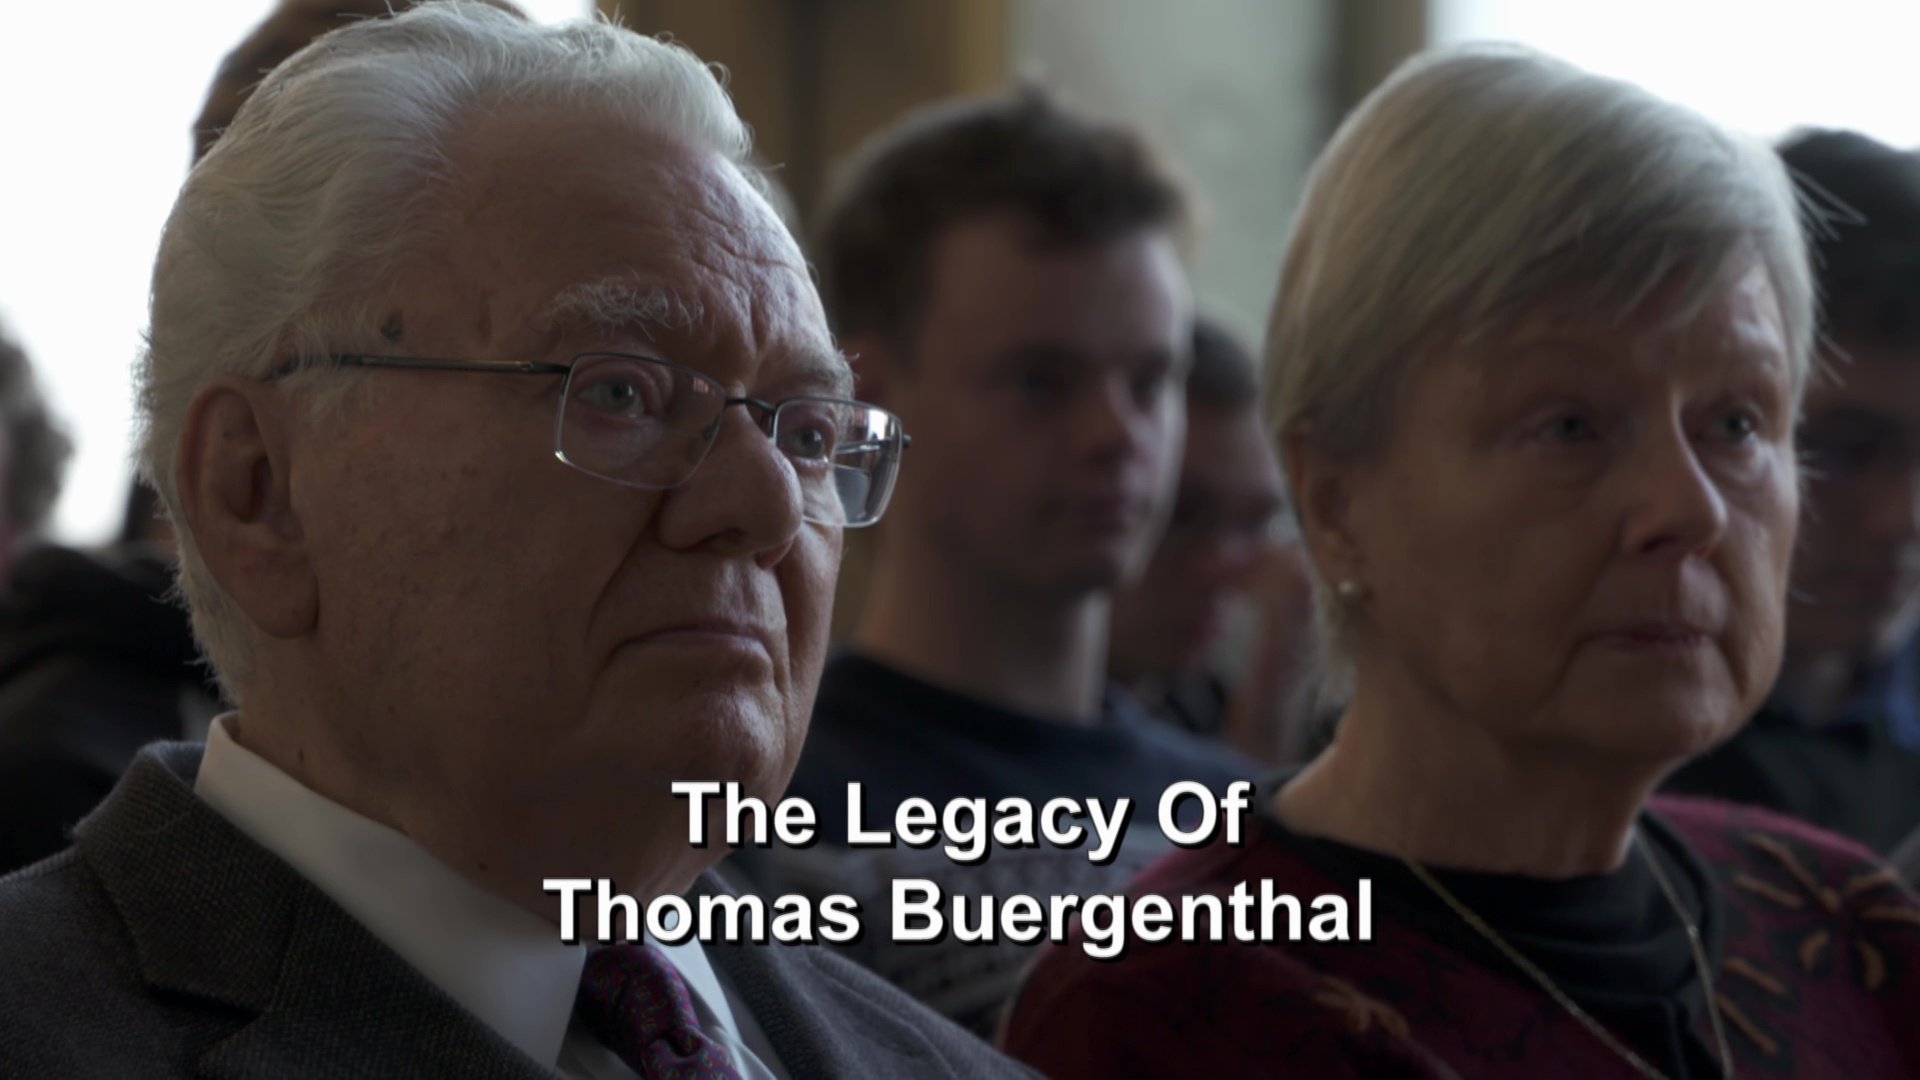 You are currently viewing Peace Through Justice – The Legacy of Thomas Buergenthal